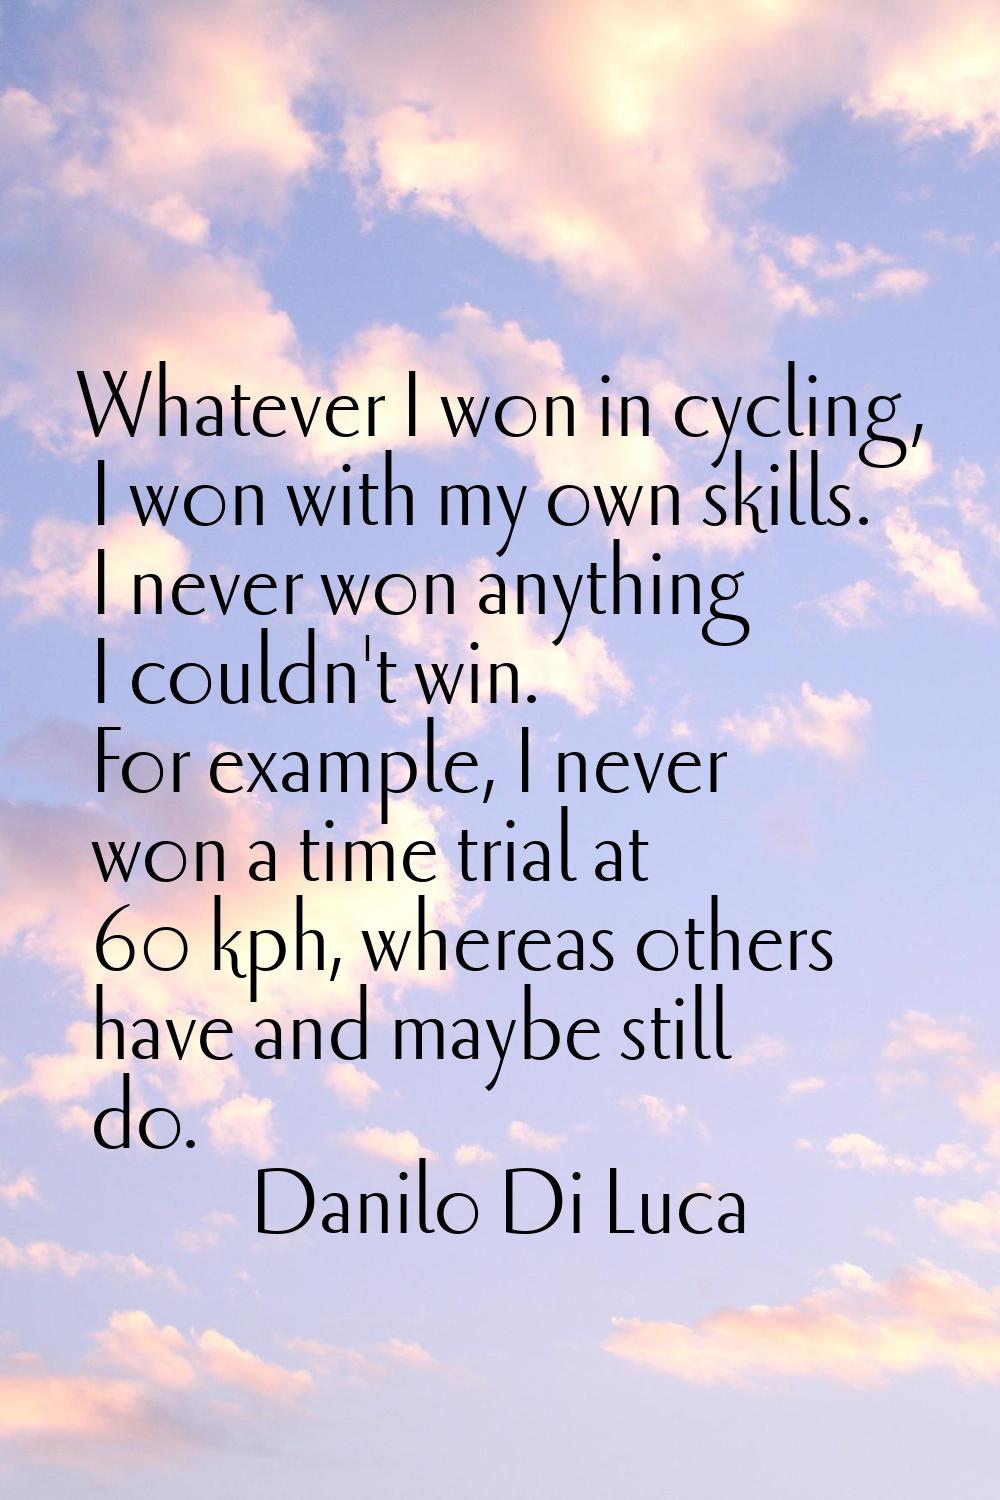 Whatever I won in cycling, I won with my own skills. I never won anything I couldn't win. For examp